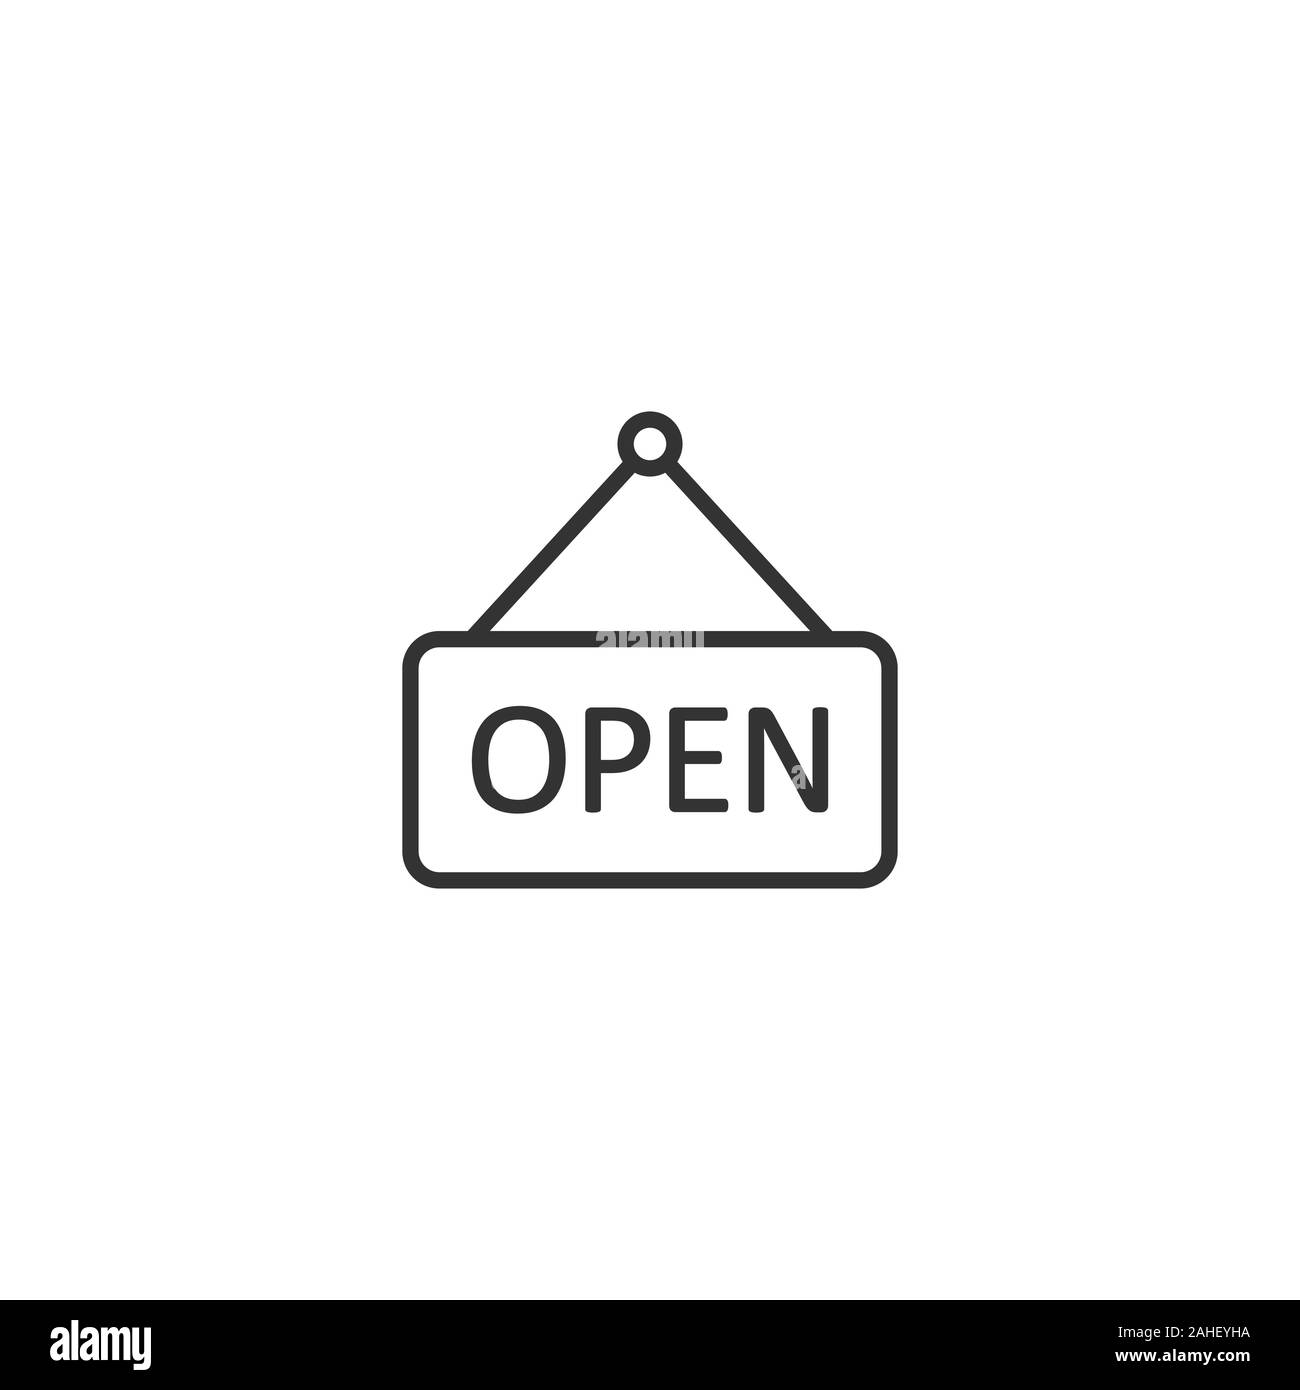 Open sign icon in flat style. Accessibility vector illustration on white isolated background. Message business concept. Stock Vector